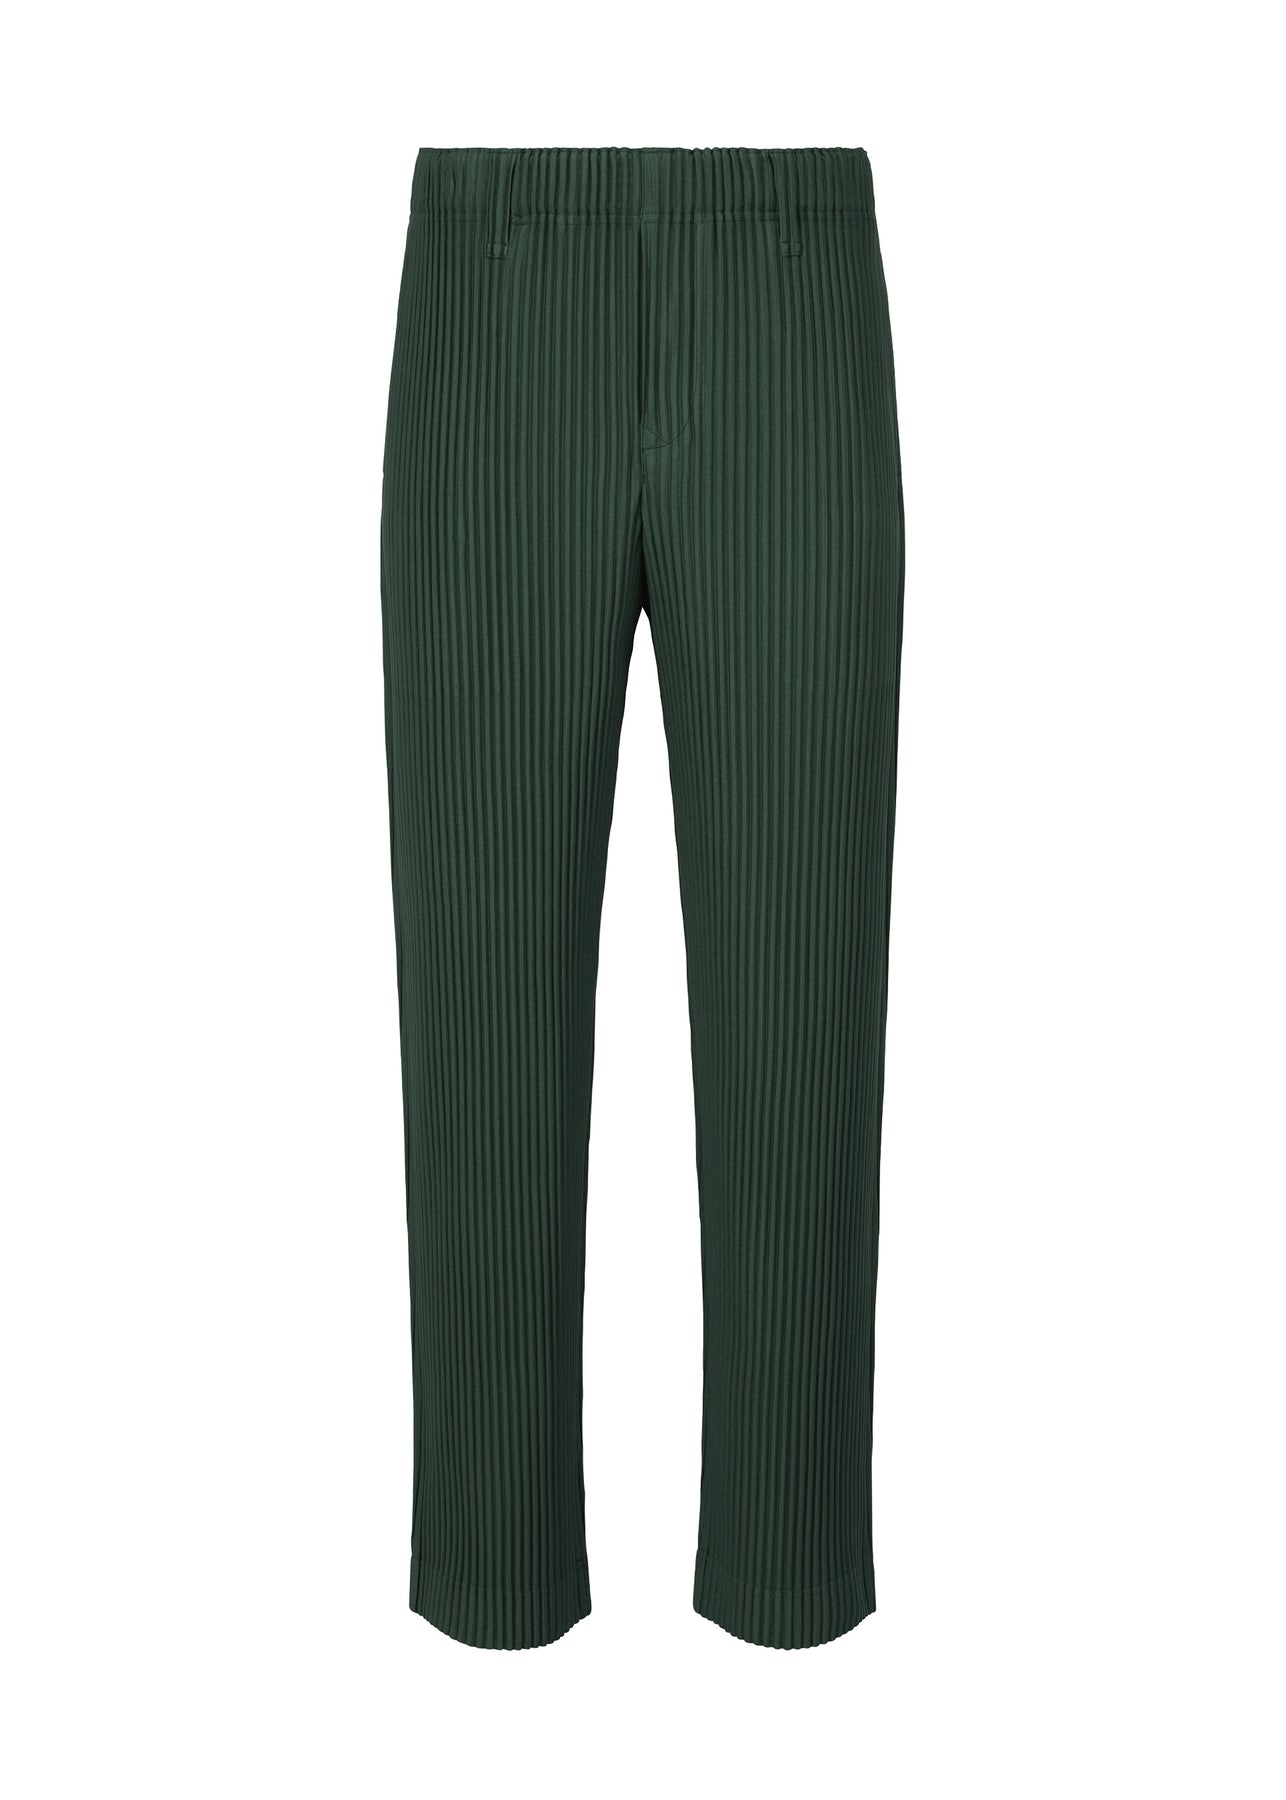 Shop Homme Plissé Issey Miyake Tailored Pleated Pants | Saks Fifth Avenue